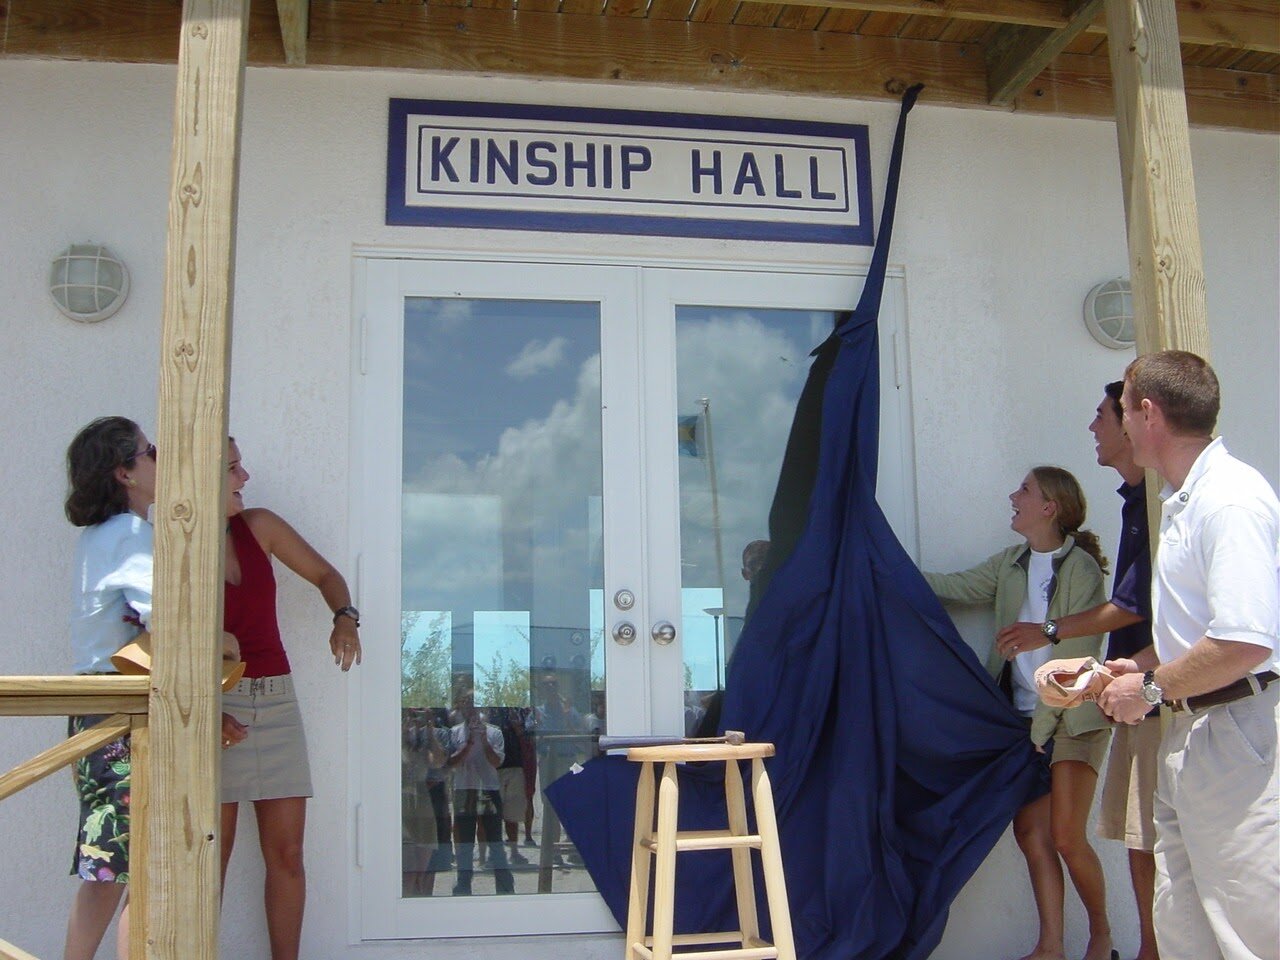 Kinship Hall is named in honor of the Searle family and was the second dormitory space built on campus as The Island School took hold and began to grow. Here, Sally’s grandchildren Jake and Abby celebrate the opening of the new space.